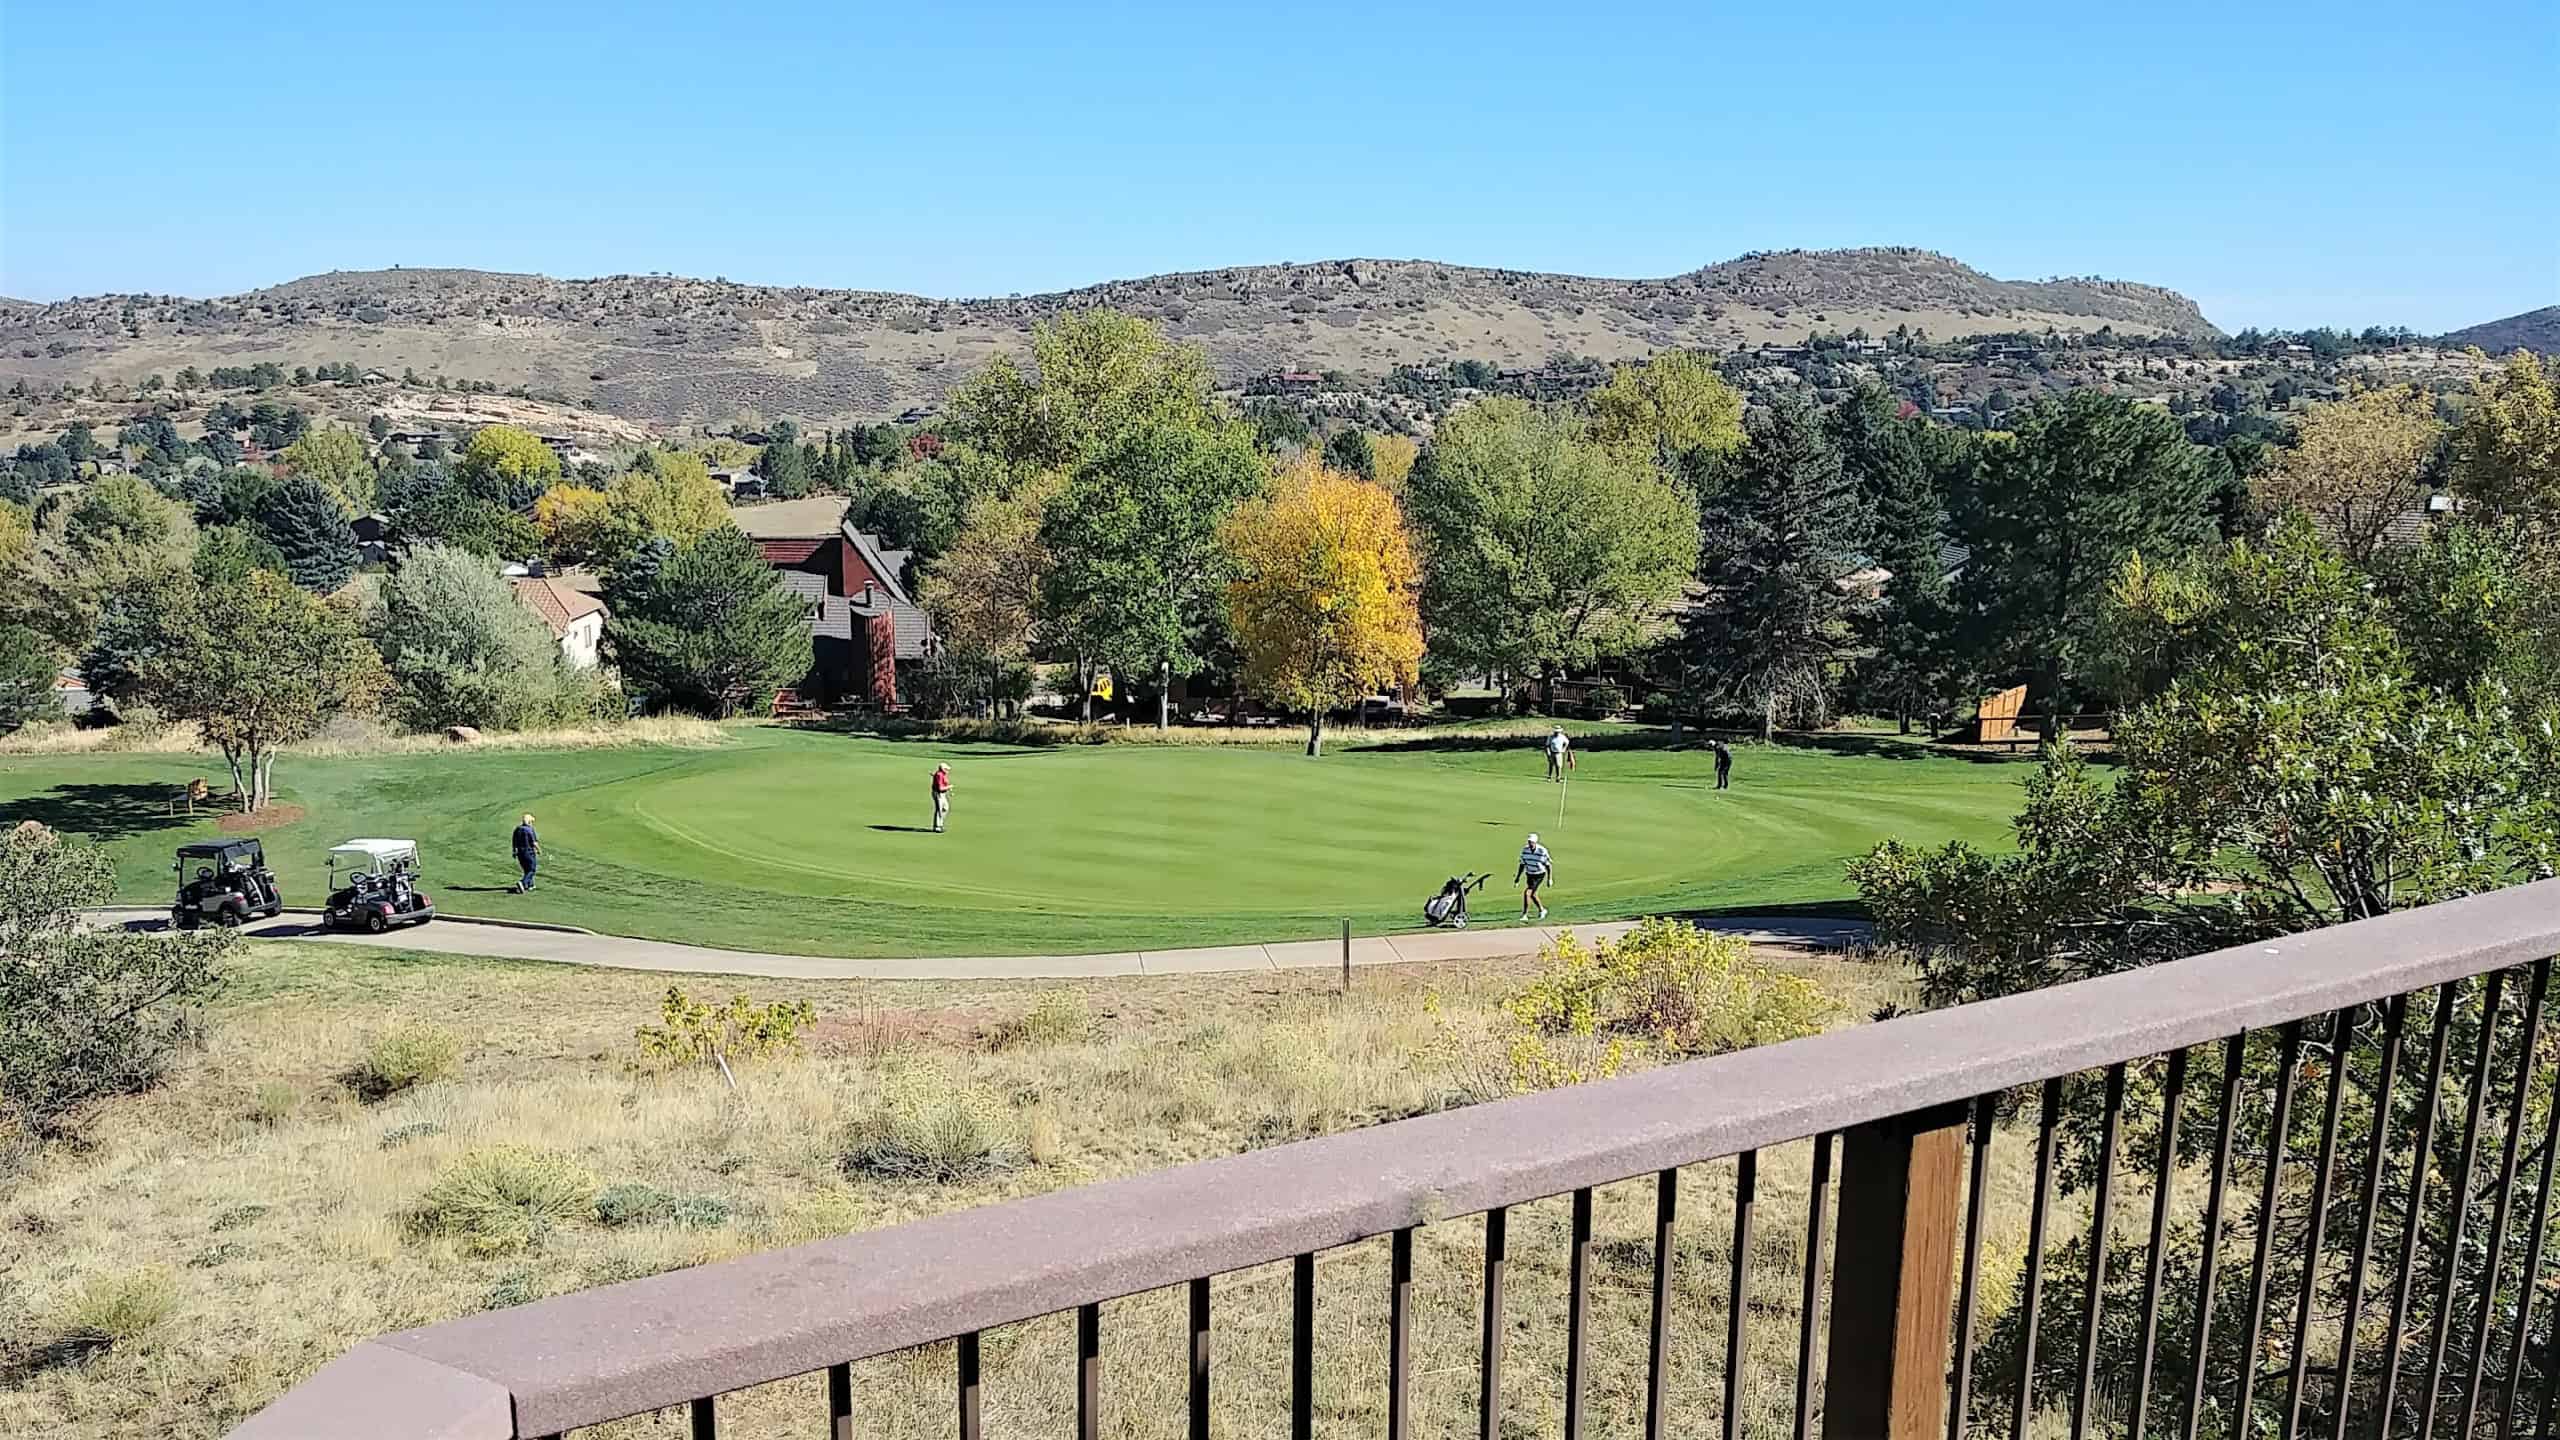 Buying a home in a golf community